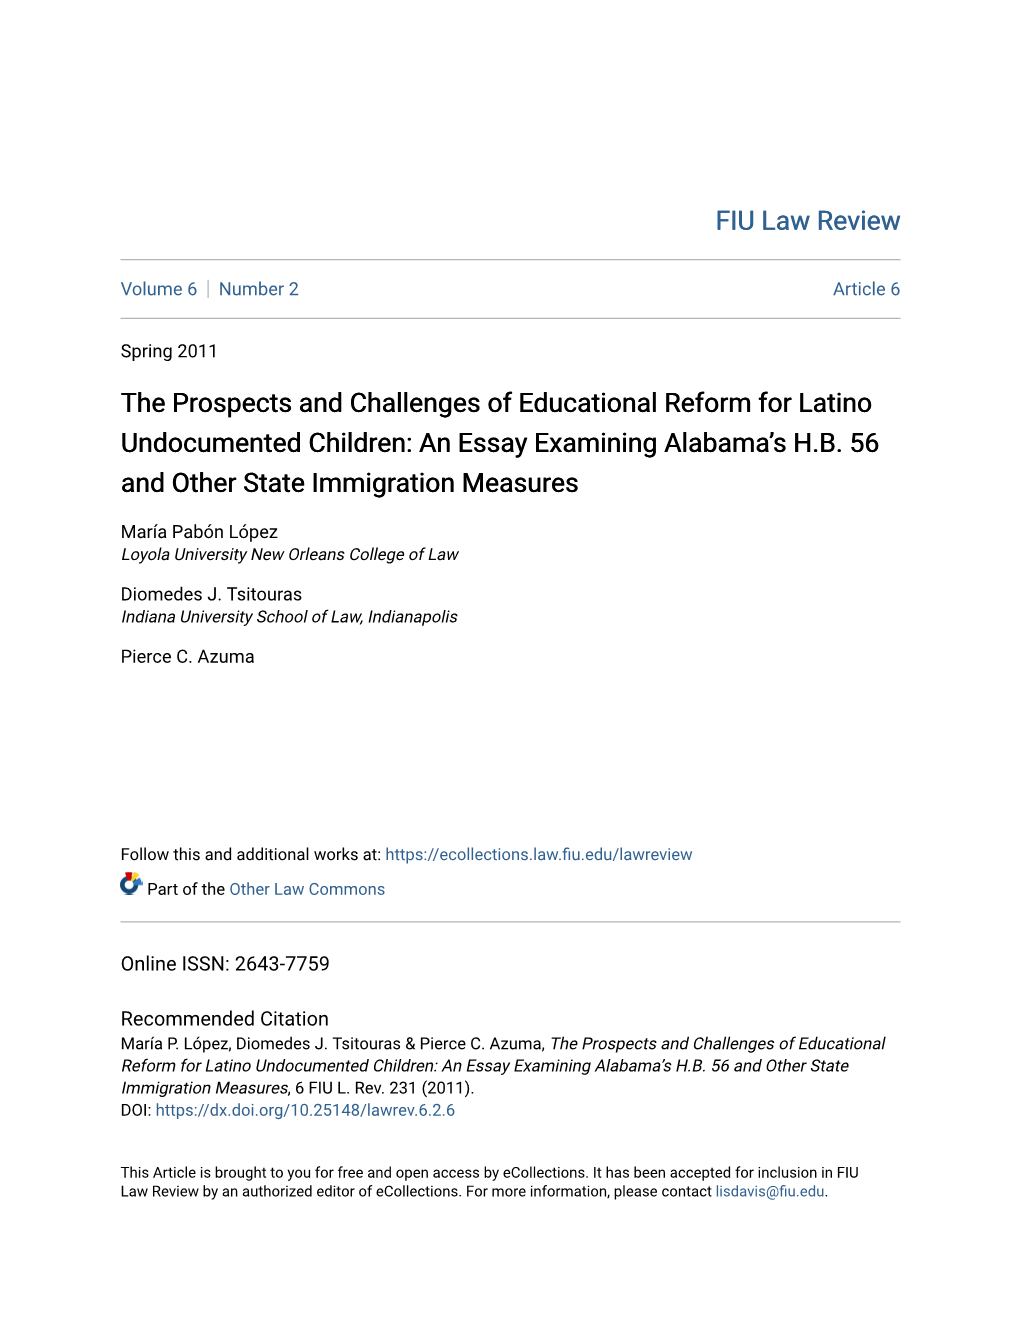 The Prospects and Challenges of Educational Reform for Latino Undocumented Children: an Essay Examining Alabamaâ•Žs H.B. 56